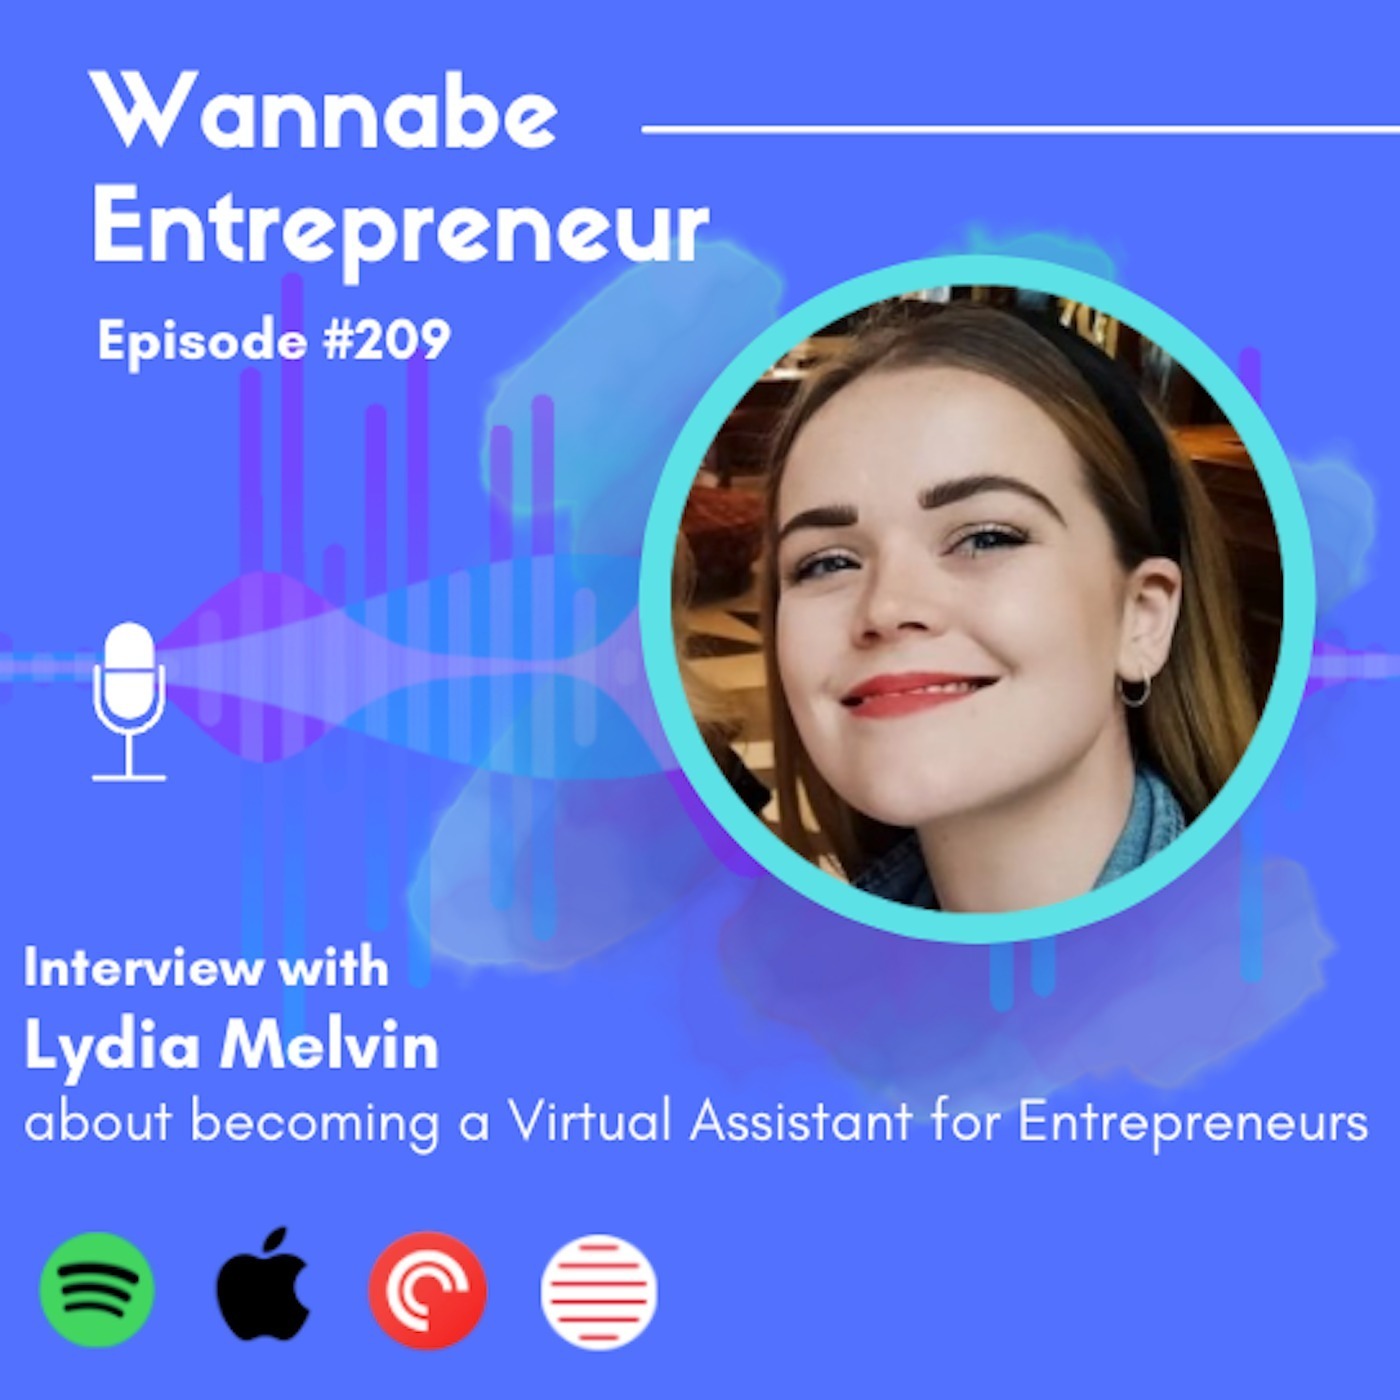 Interviewing Lydia about becoming a Virtual Assistant for Entrepreneurs